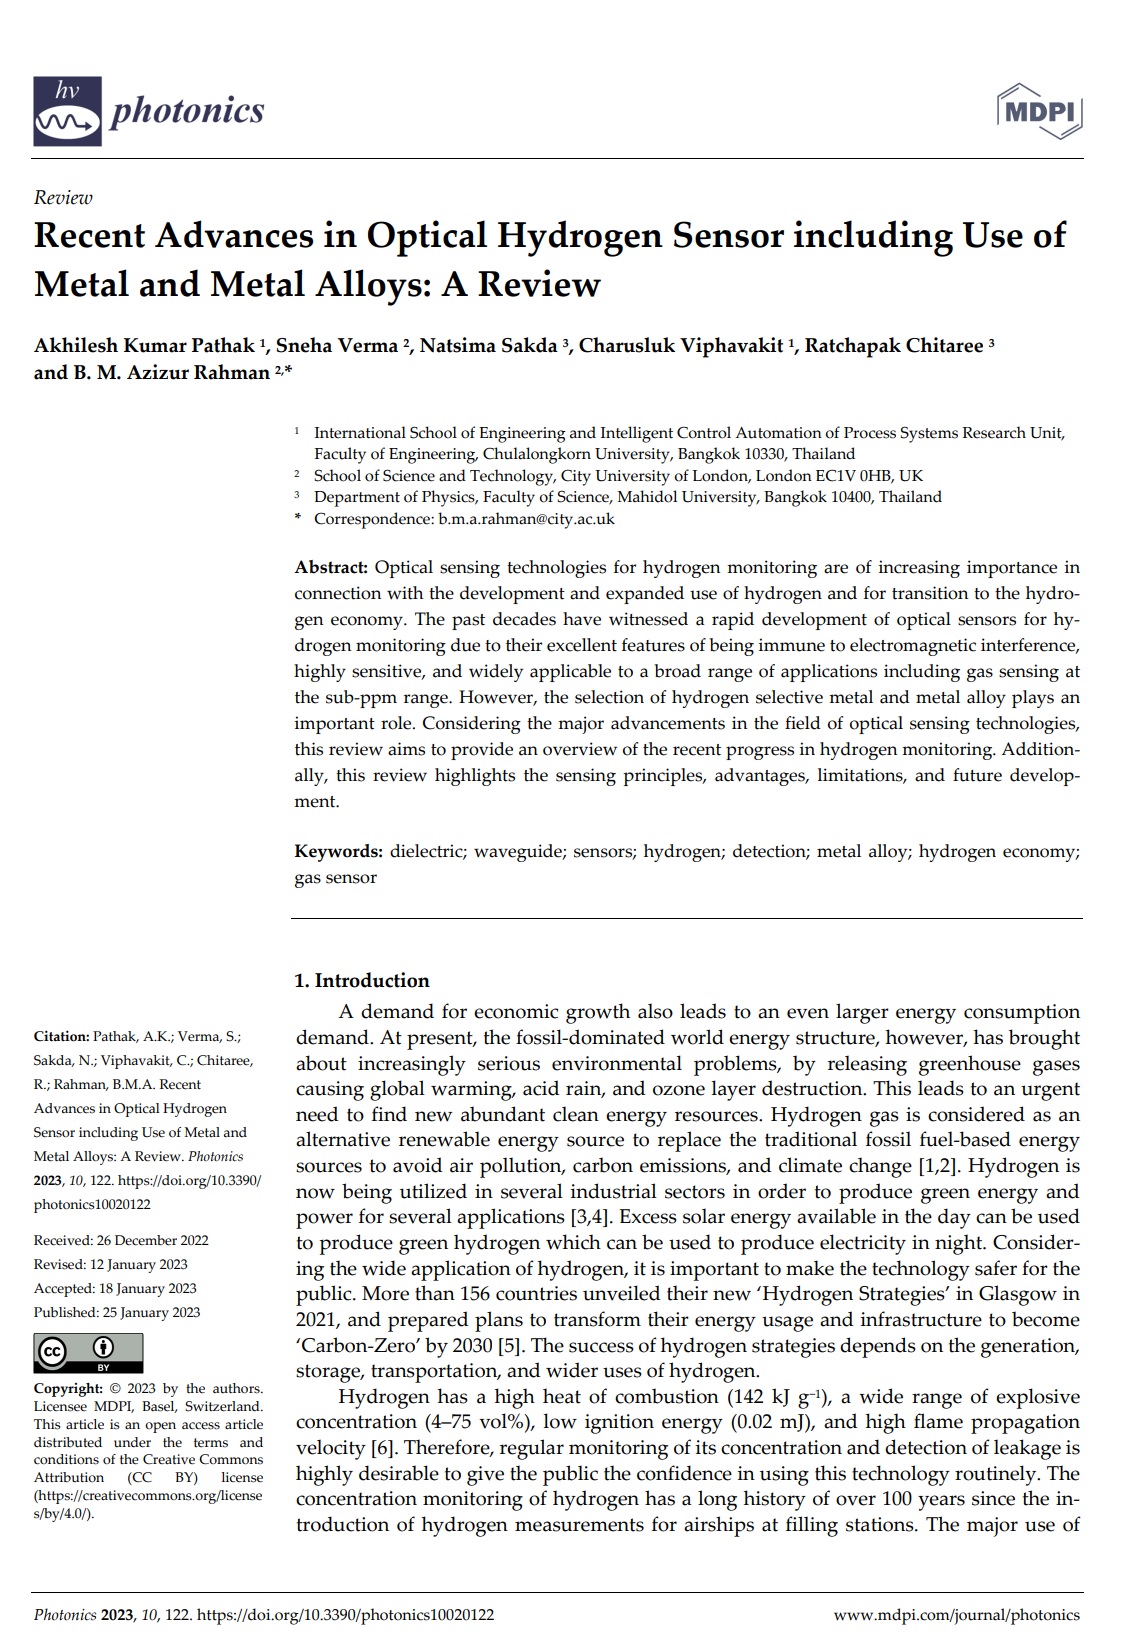 Recent Advances in Optical Hydrogen Sensor including Use of Metal and Metal Alloys: A Review